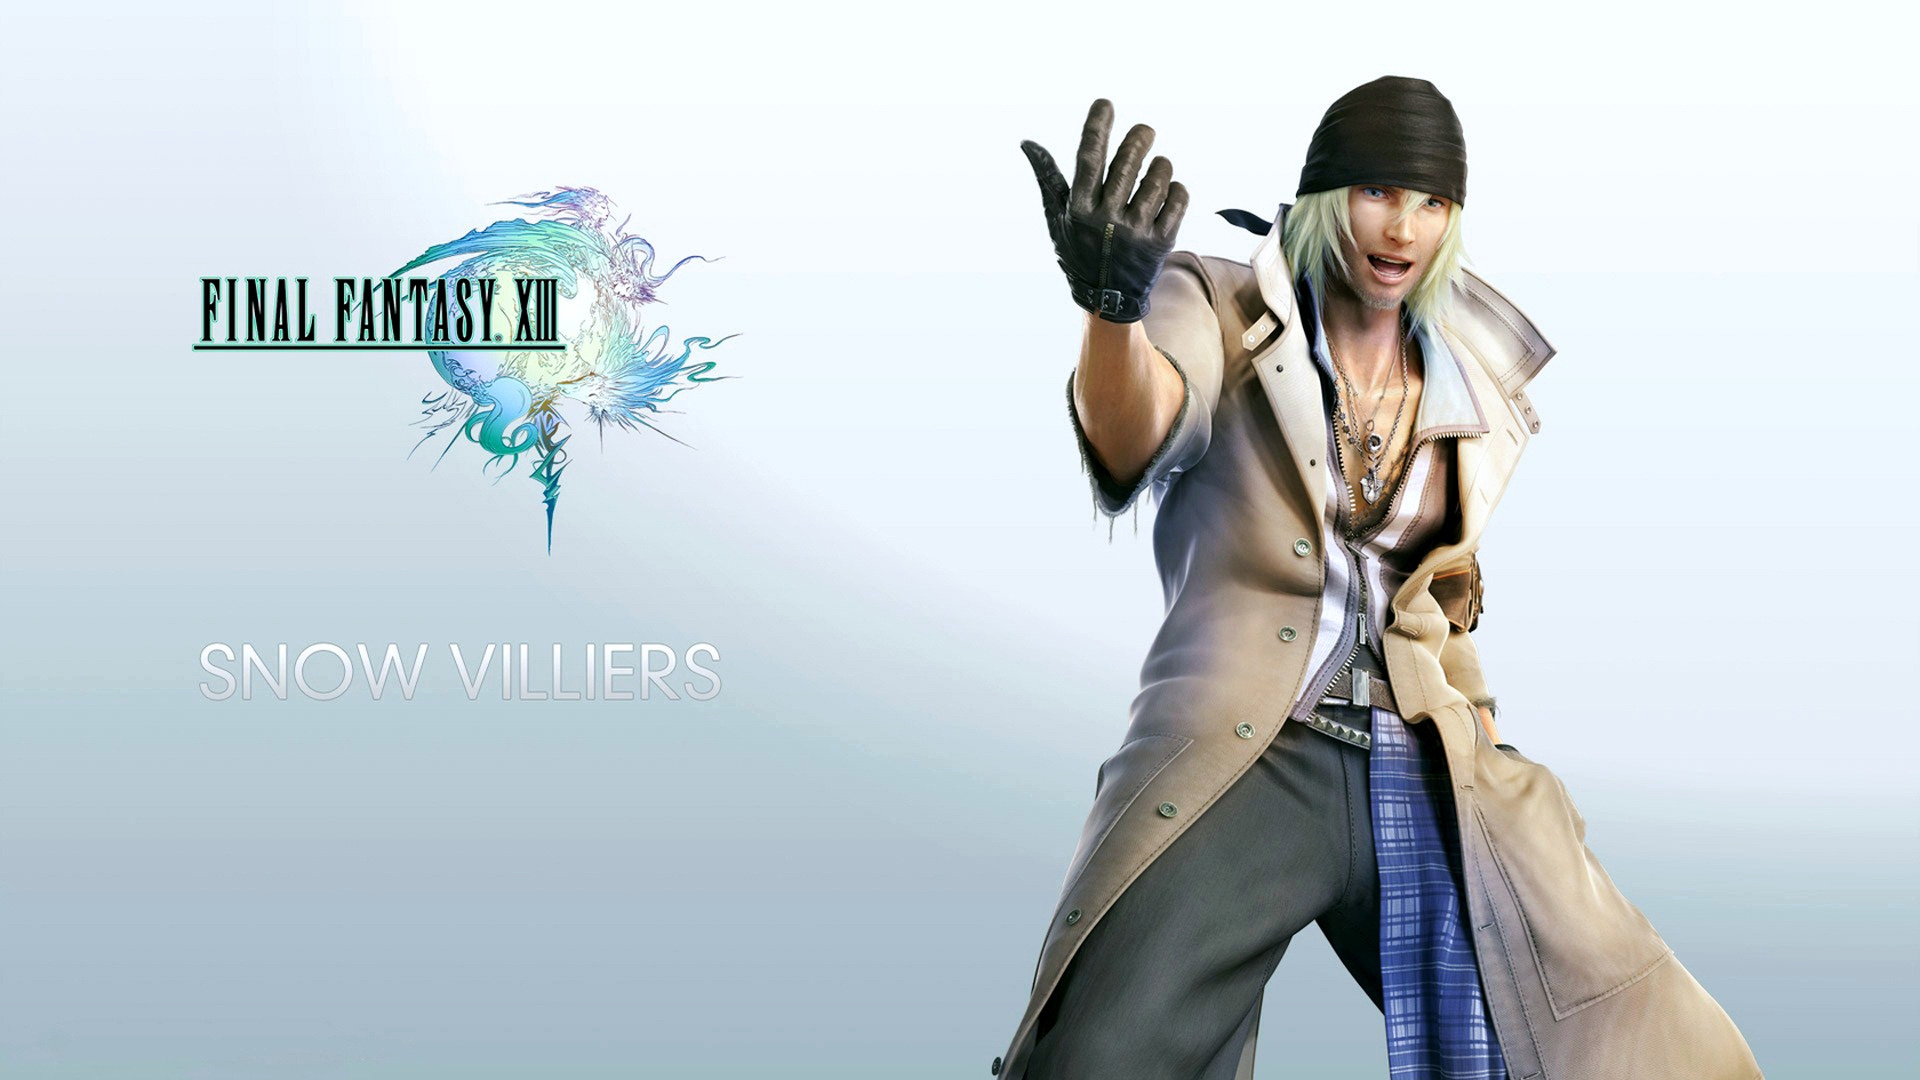 Final Fantasy XIII Snow Villiers for 1920 x 1080 HDTV 1080p resolution